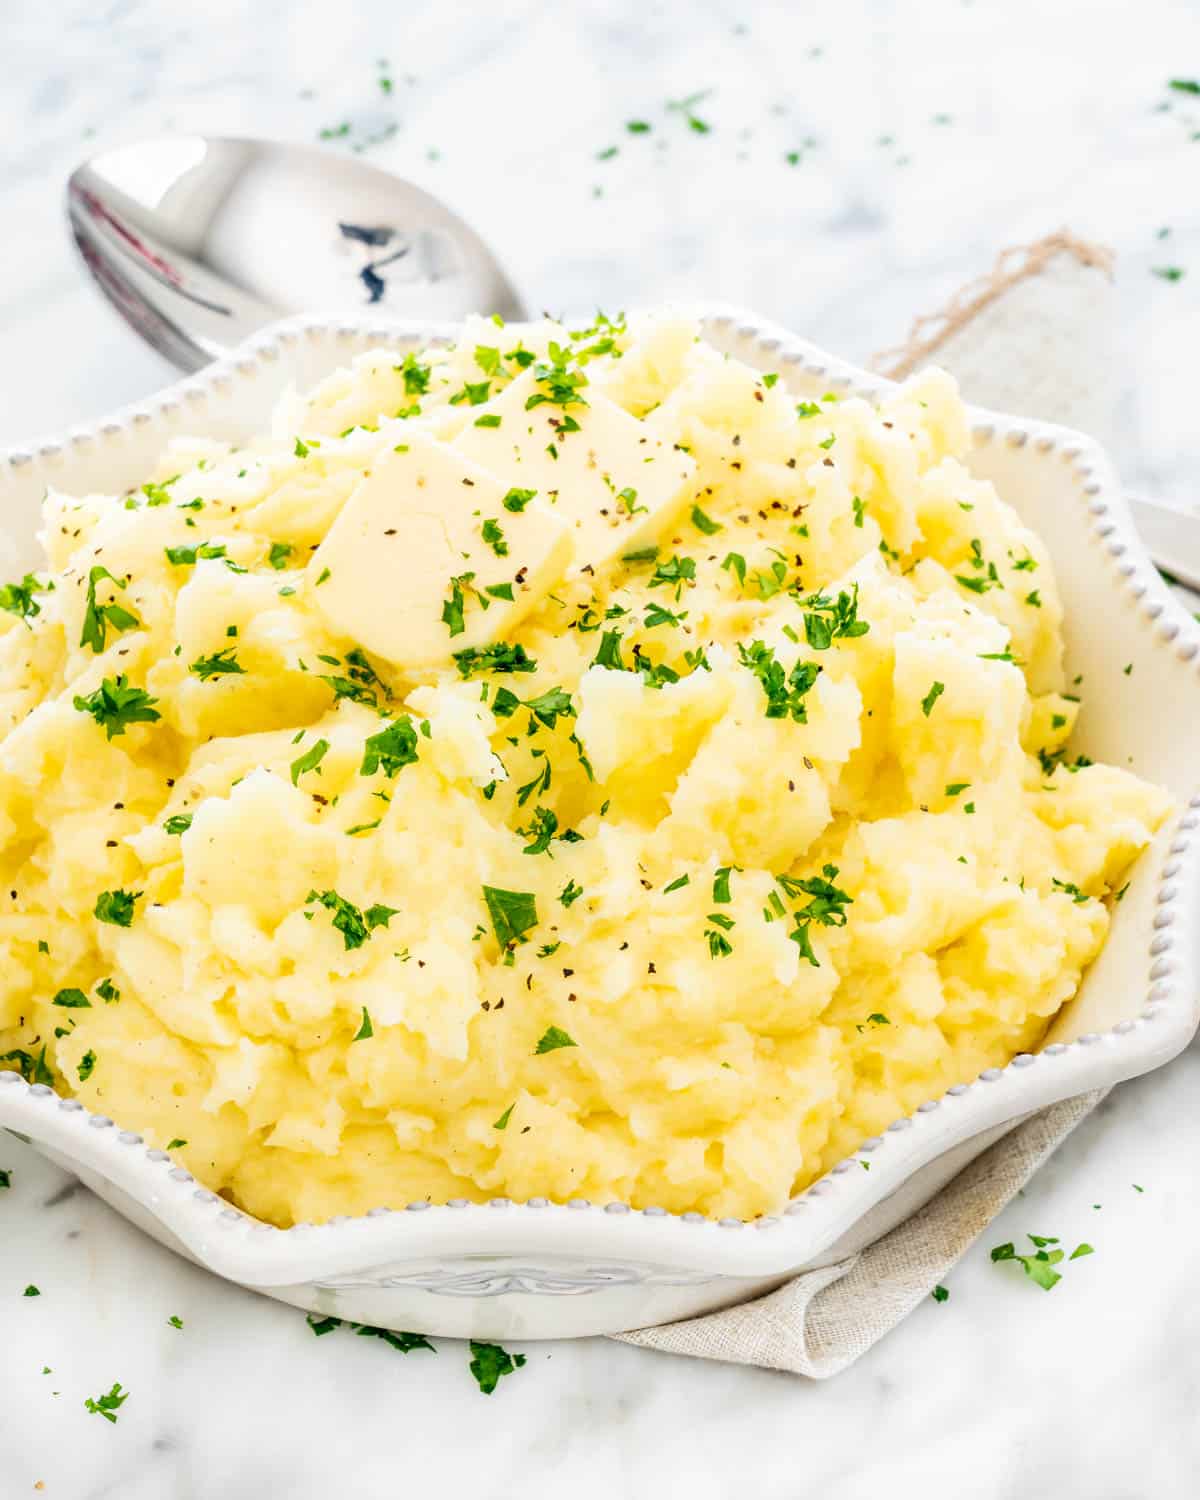 mashed potatoes in a white bowl with some butter over top and garnished with parsley